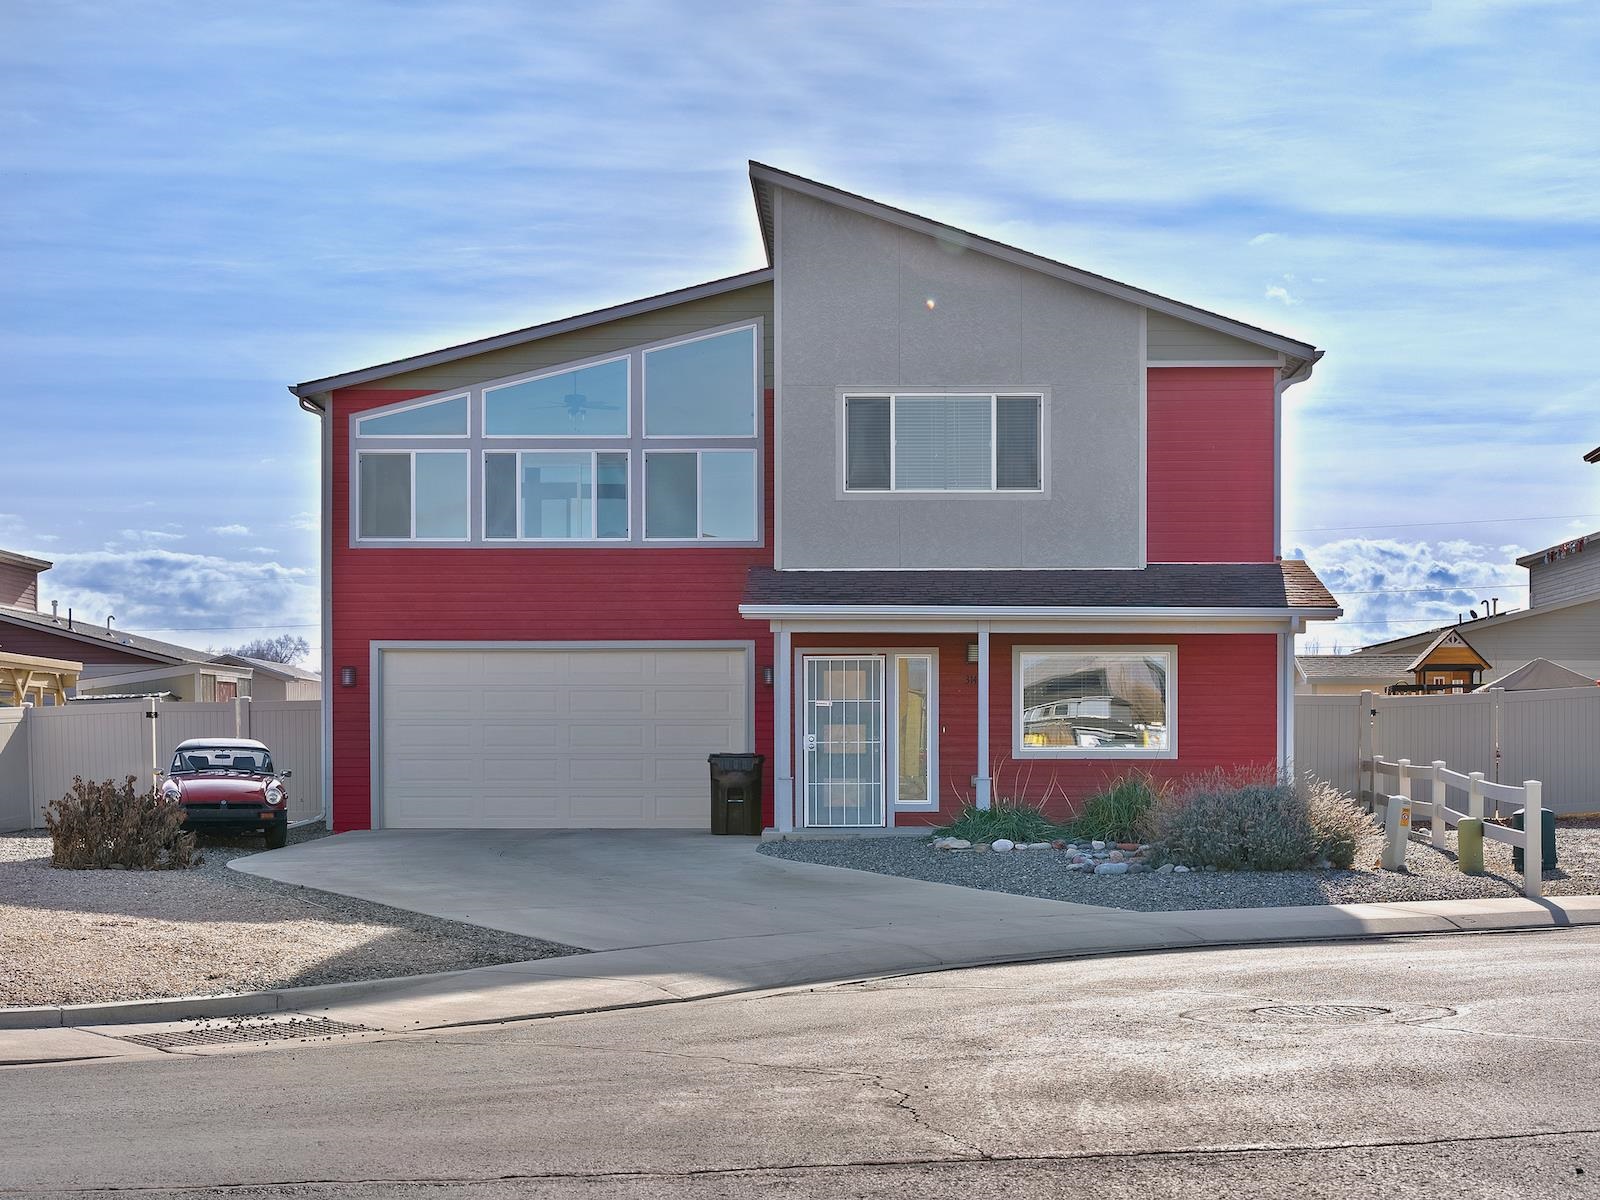 Say hello to  3143 Snake River Drive.  This  home sits in an awesome, modern  neighborhood in Southeast Grand Junction and has all of the perfect conveniences. There is room to spread out in this 3 bedroom, 2 1/2 bathroom, 2,000+ square foot residence with a great enclosed sun room offering amazing views of the bookcliffs. This house has forced air heat, and central A/C to keep you comfortable indoors all year round, with solar panels to help on those pesky electric bills. The back yard boasts an above ground pool, brand new covered hot tub and low maintenance landscaping.  The front yard is full xeriscaped providing low maintenance as well and extra parking for your toys. There are 2 storage sheds, and shelving in the garage for ample storage space as well. Come see your new clean, turn key home today!